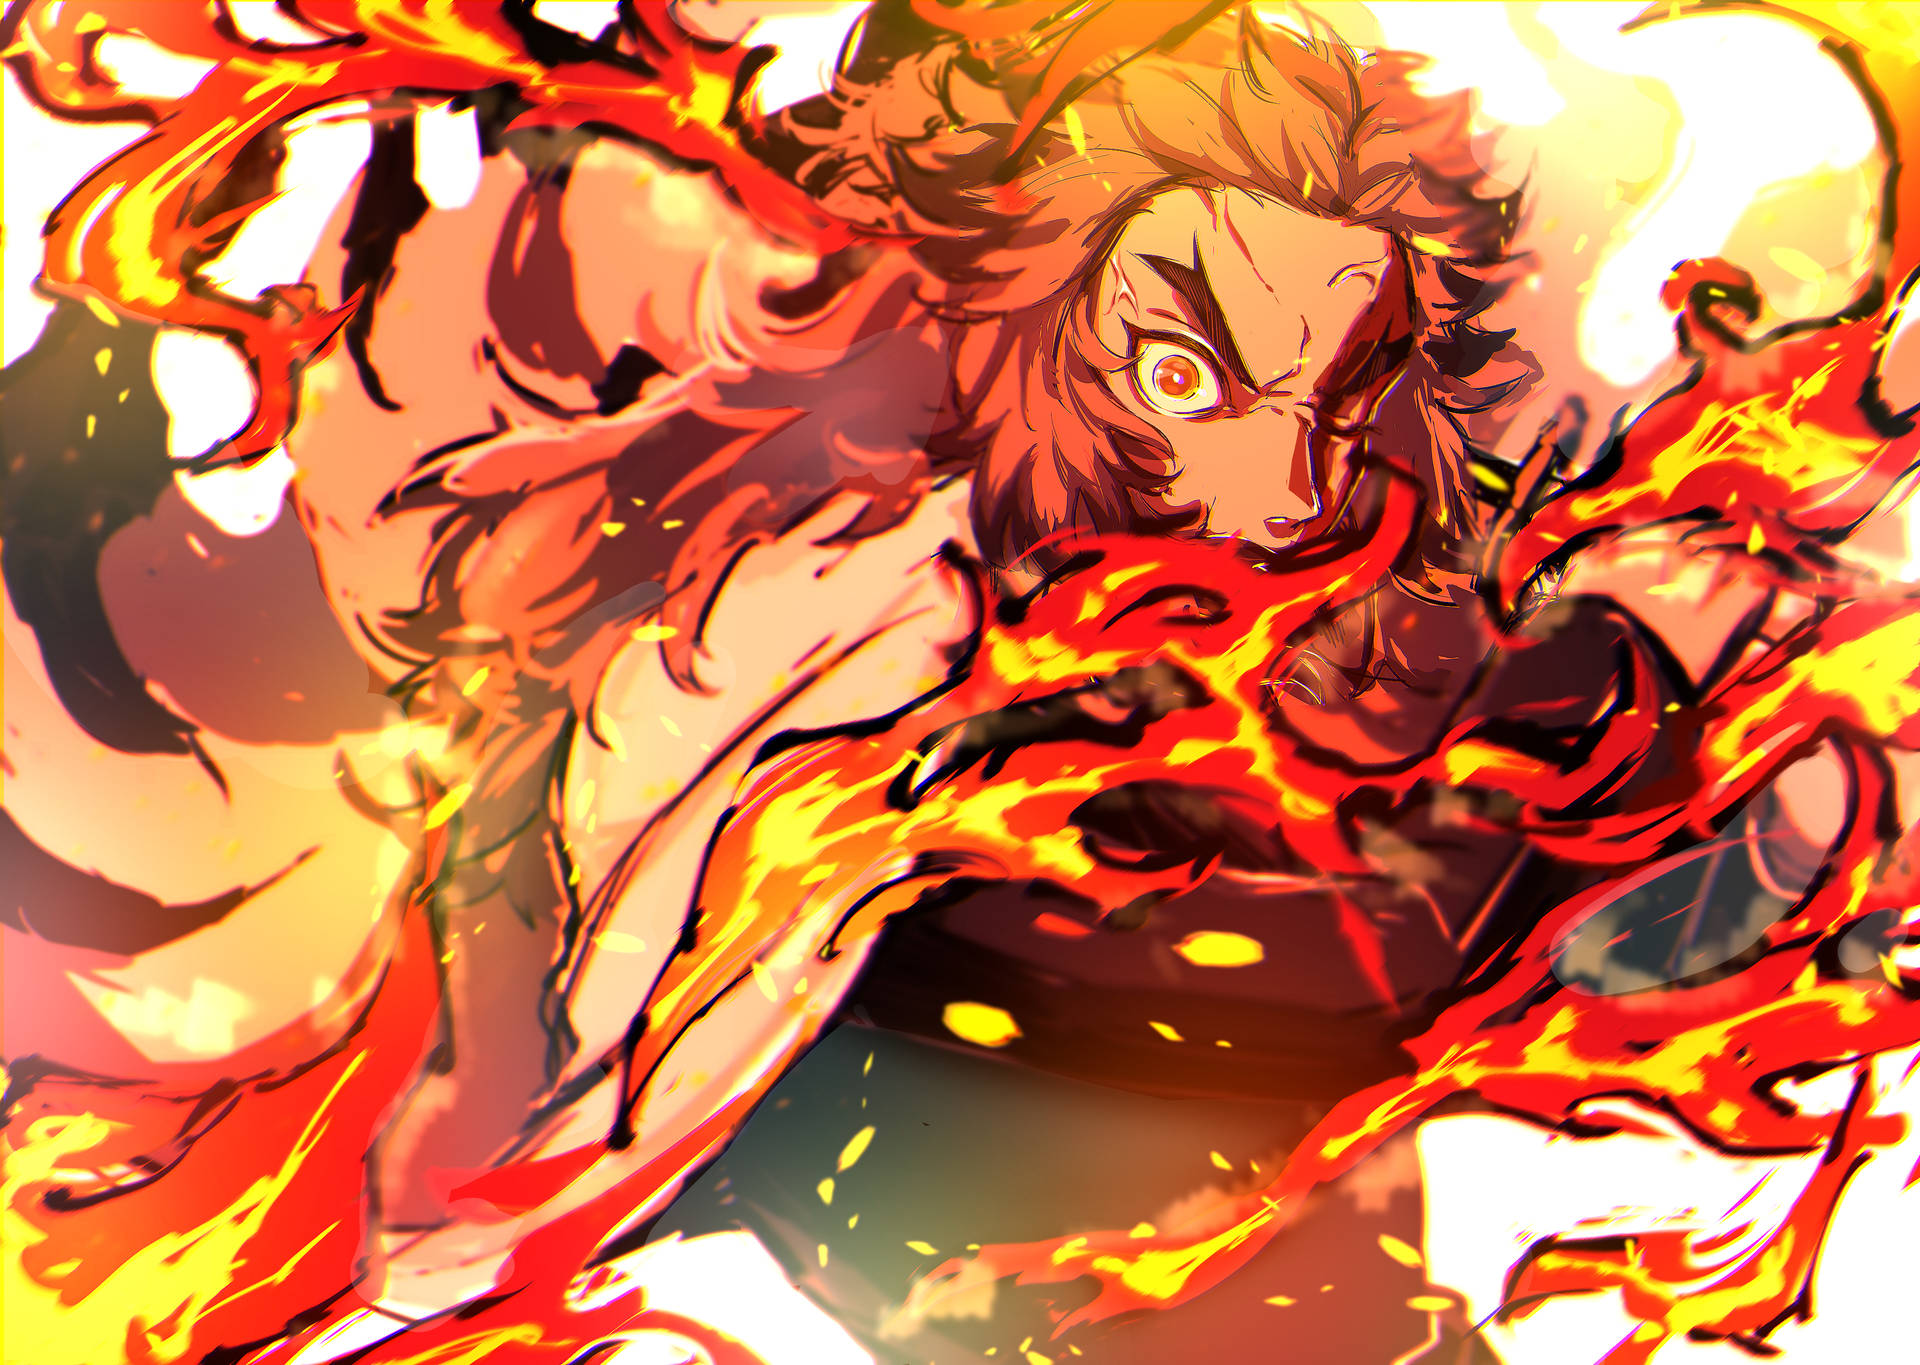 Kyojuro Rengoku Surrounded By Flames